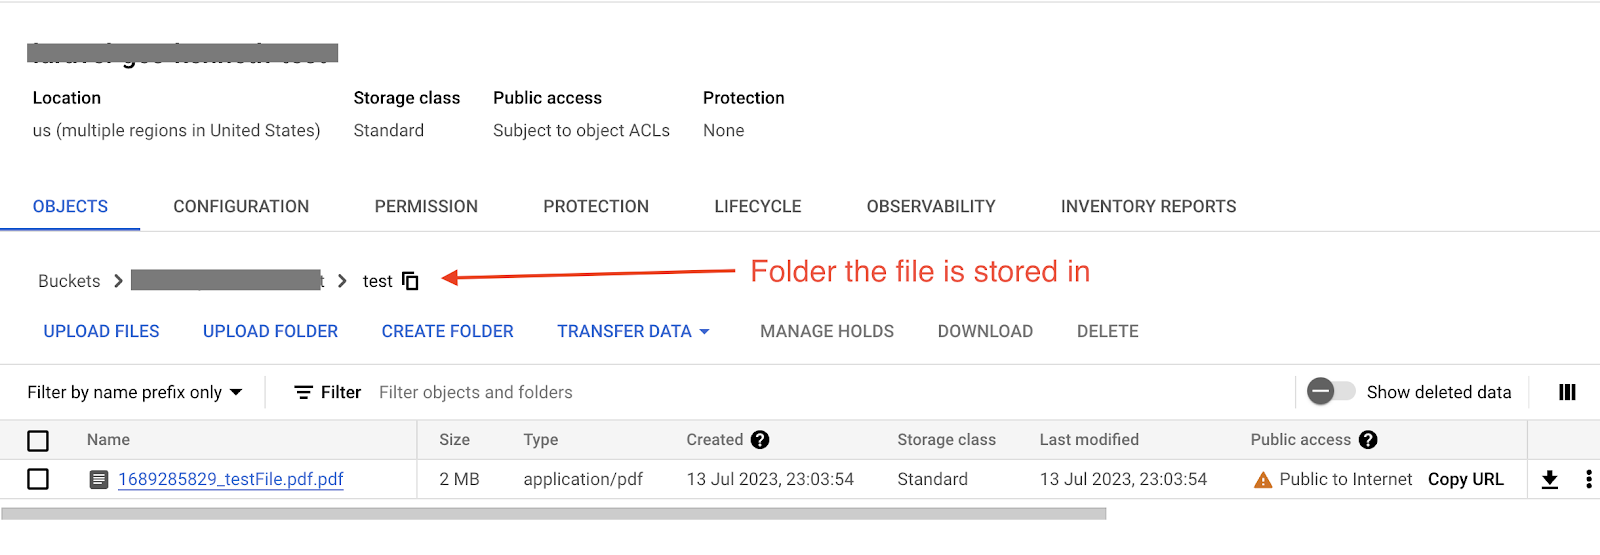 Showing the file uploaded to the Google Cloud Storage bucket